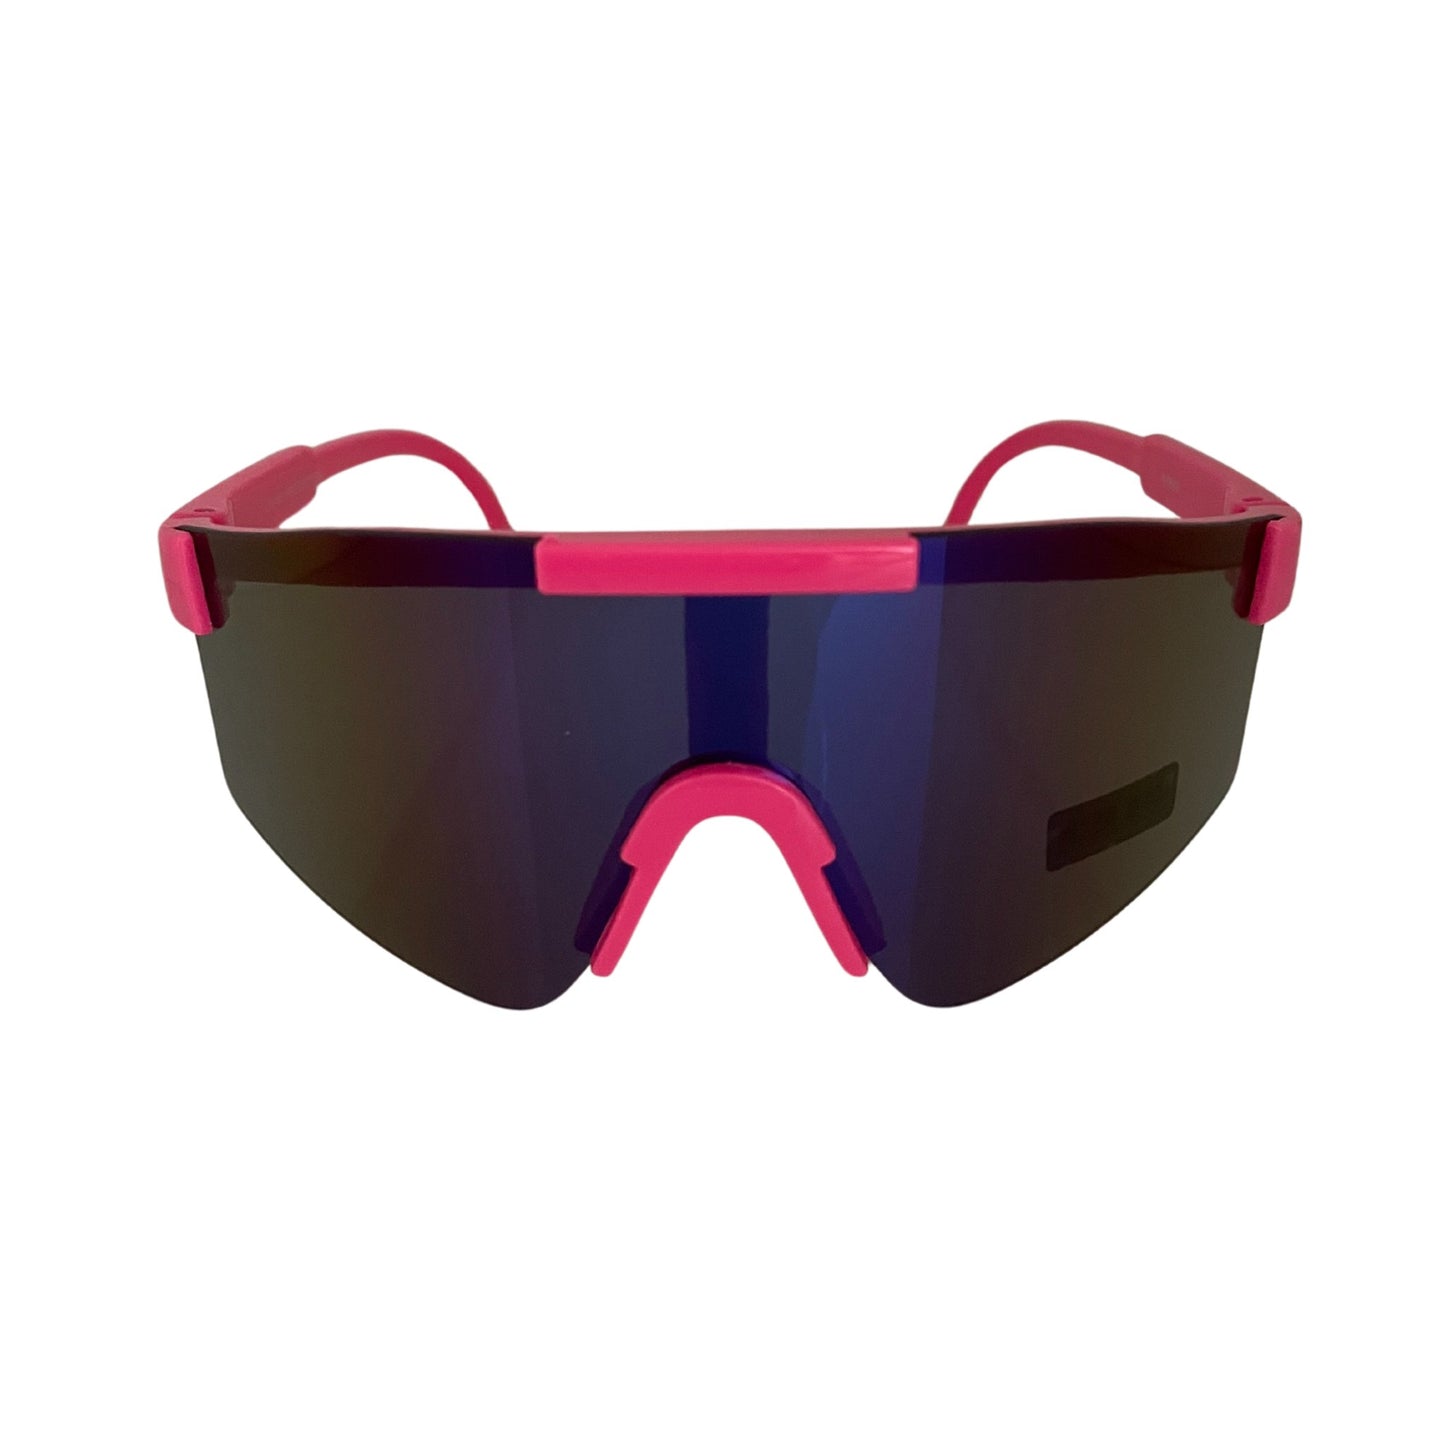 Kids Bright Polycarbonate Shield Sunglasses - Talk to the Hand